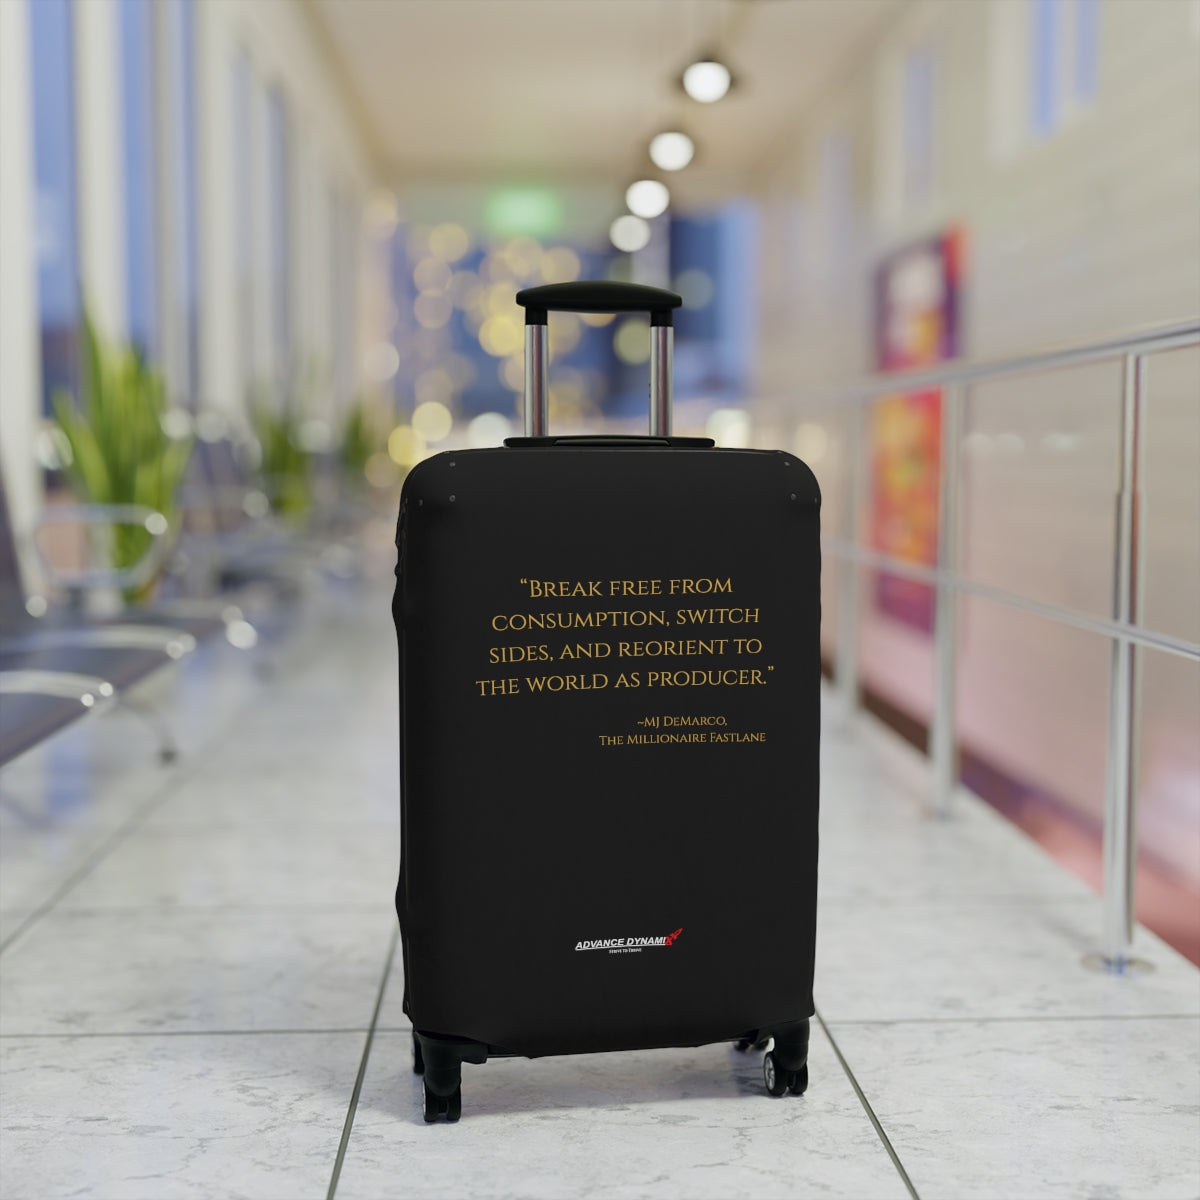 "Break free from consumption, switch..." ~MJ DeMarco, The Millionaire Fastlane - Luggage Covers Infused with Advance Dynamix Add-A-Tude - Tell the world!